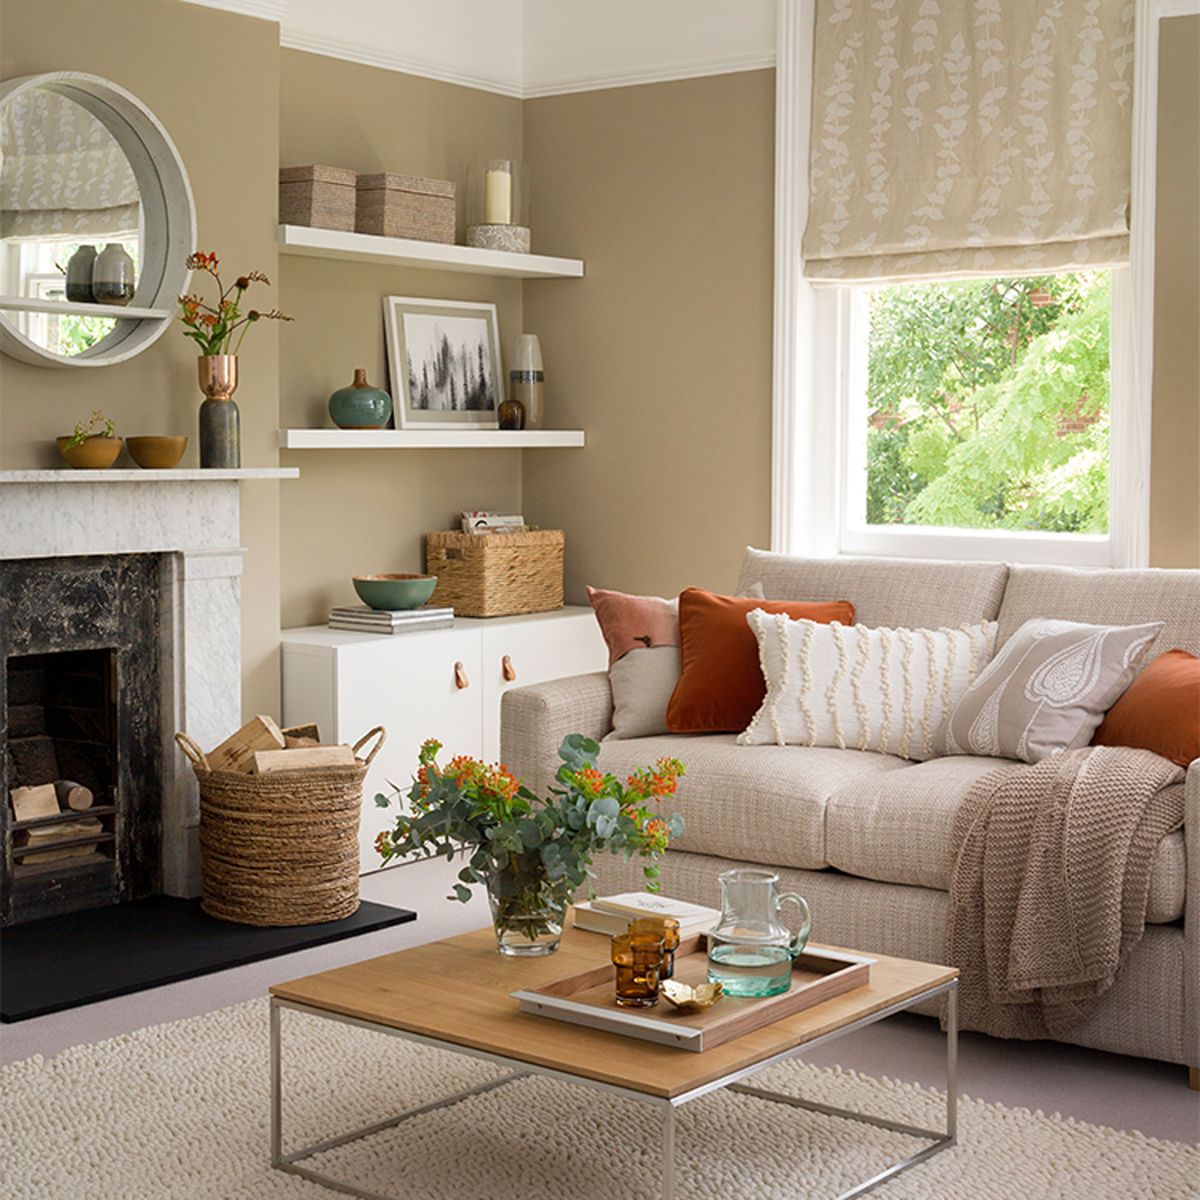 Beige living room ideas – stay neutral with this easygoing colourway